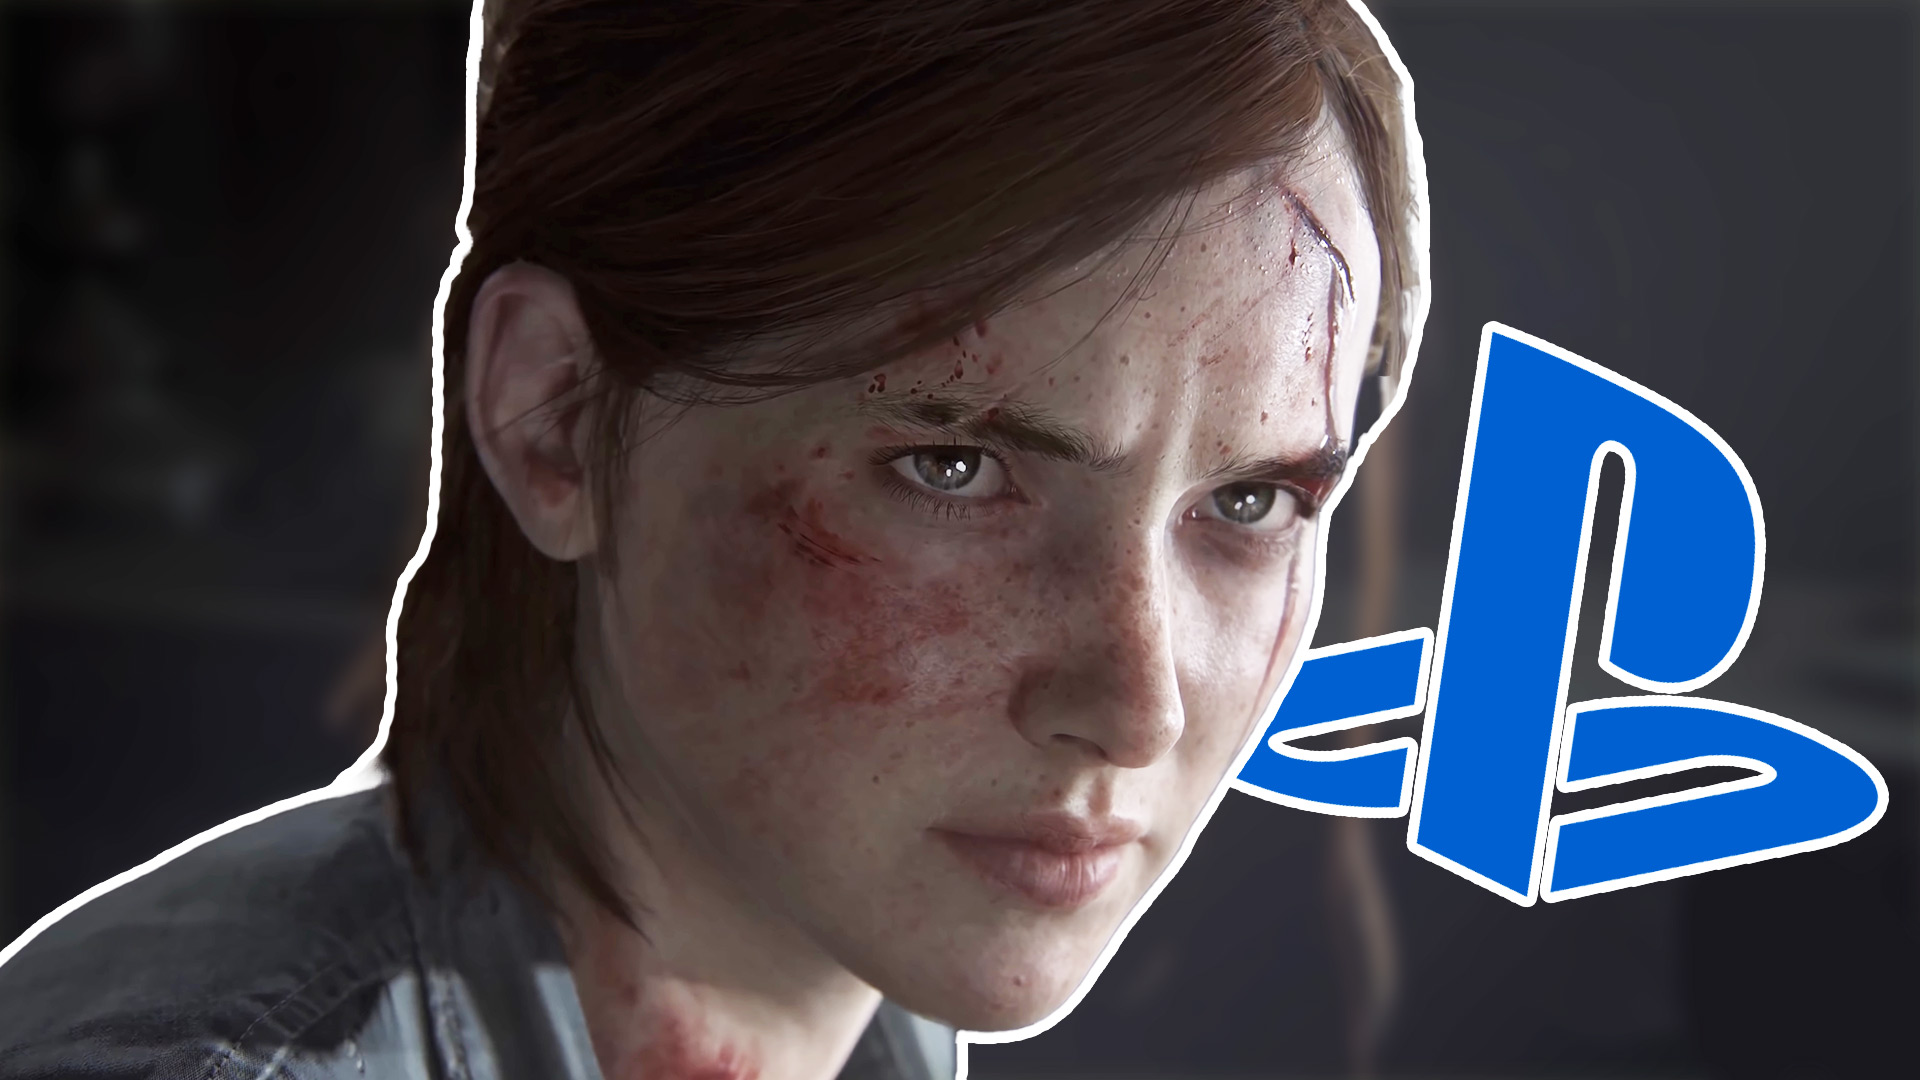 Last of Us Online cancelled: Why was multiplayer Factions sequel axed?